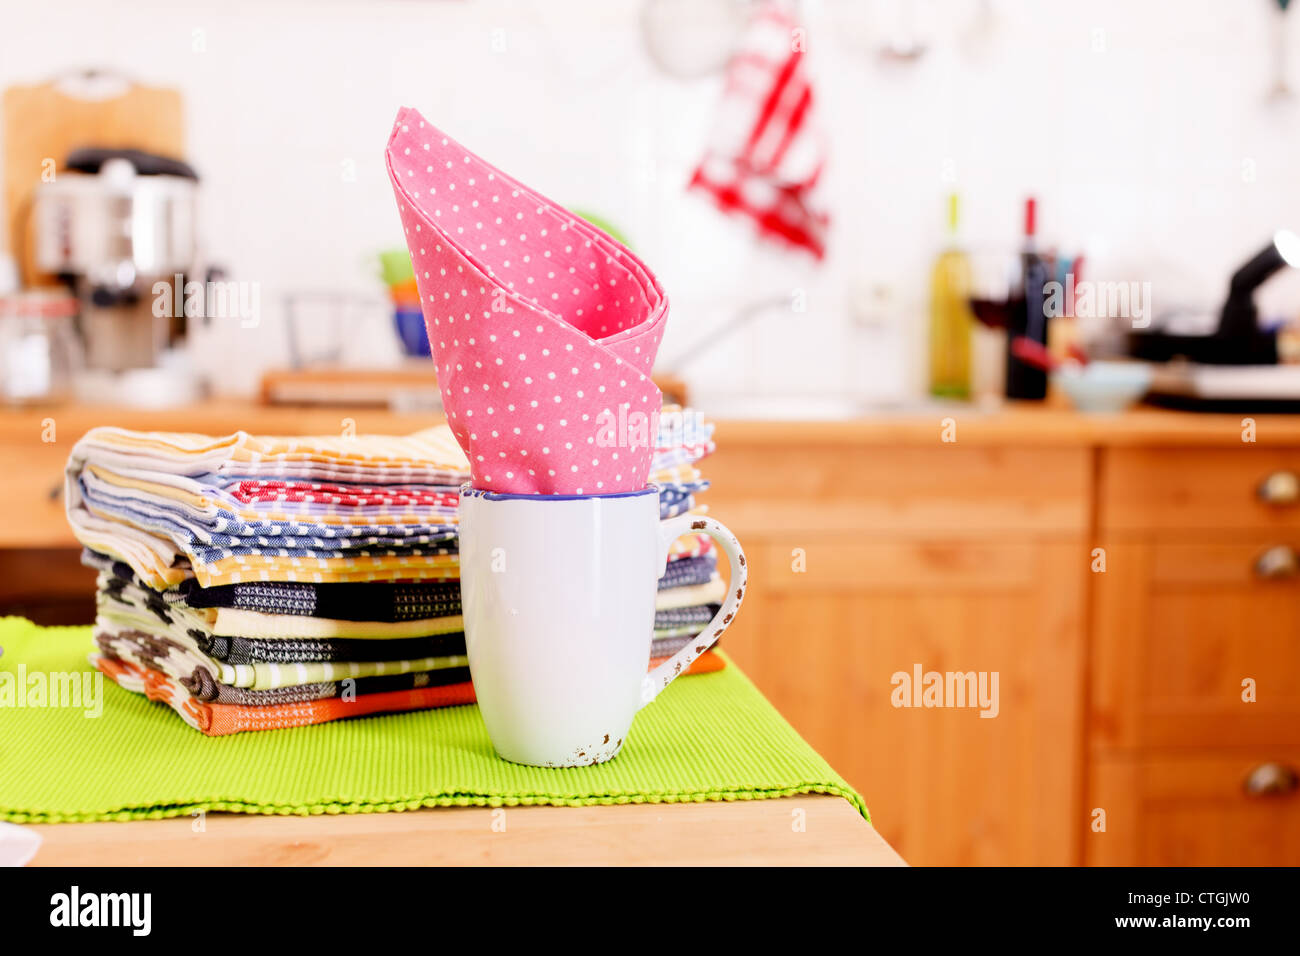 Cloth and a mug on the kitchen table Stock Photo